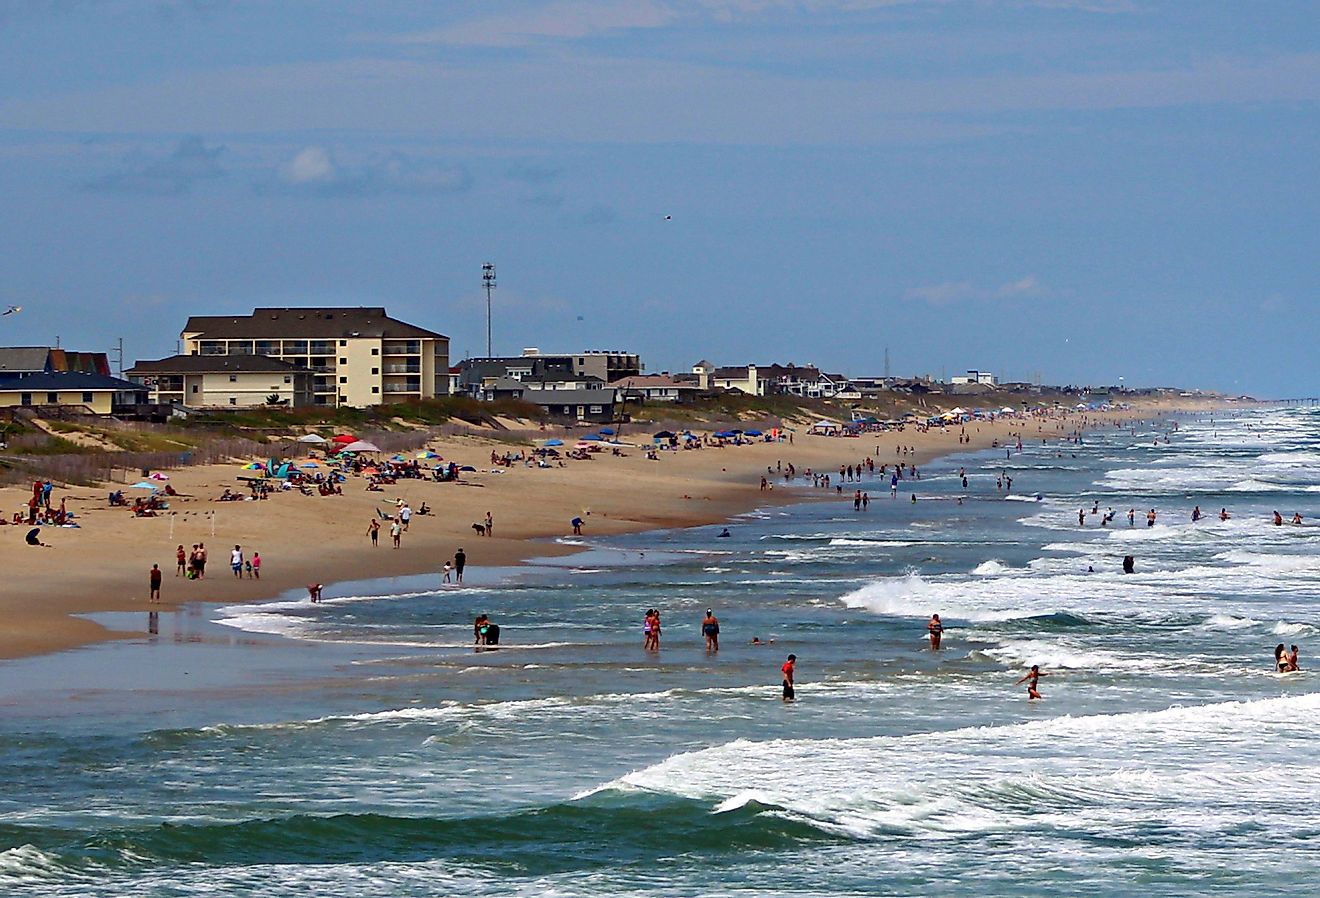 People on the beach and in the water at Nags Head Beach, Outer Banks.